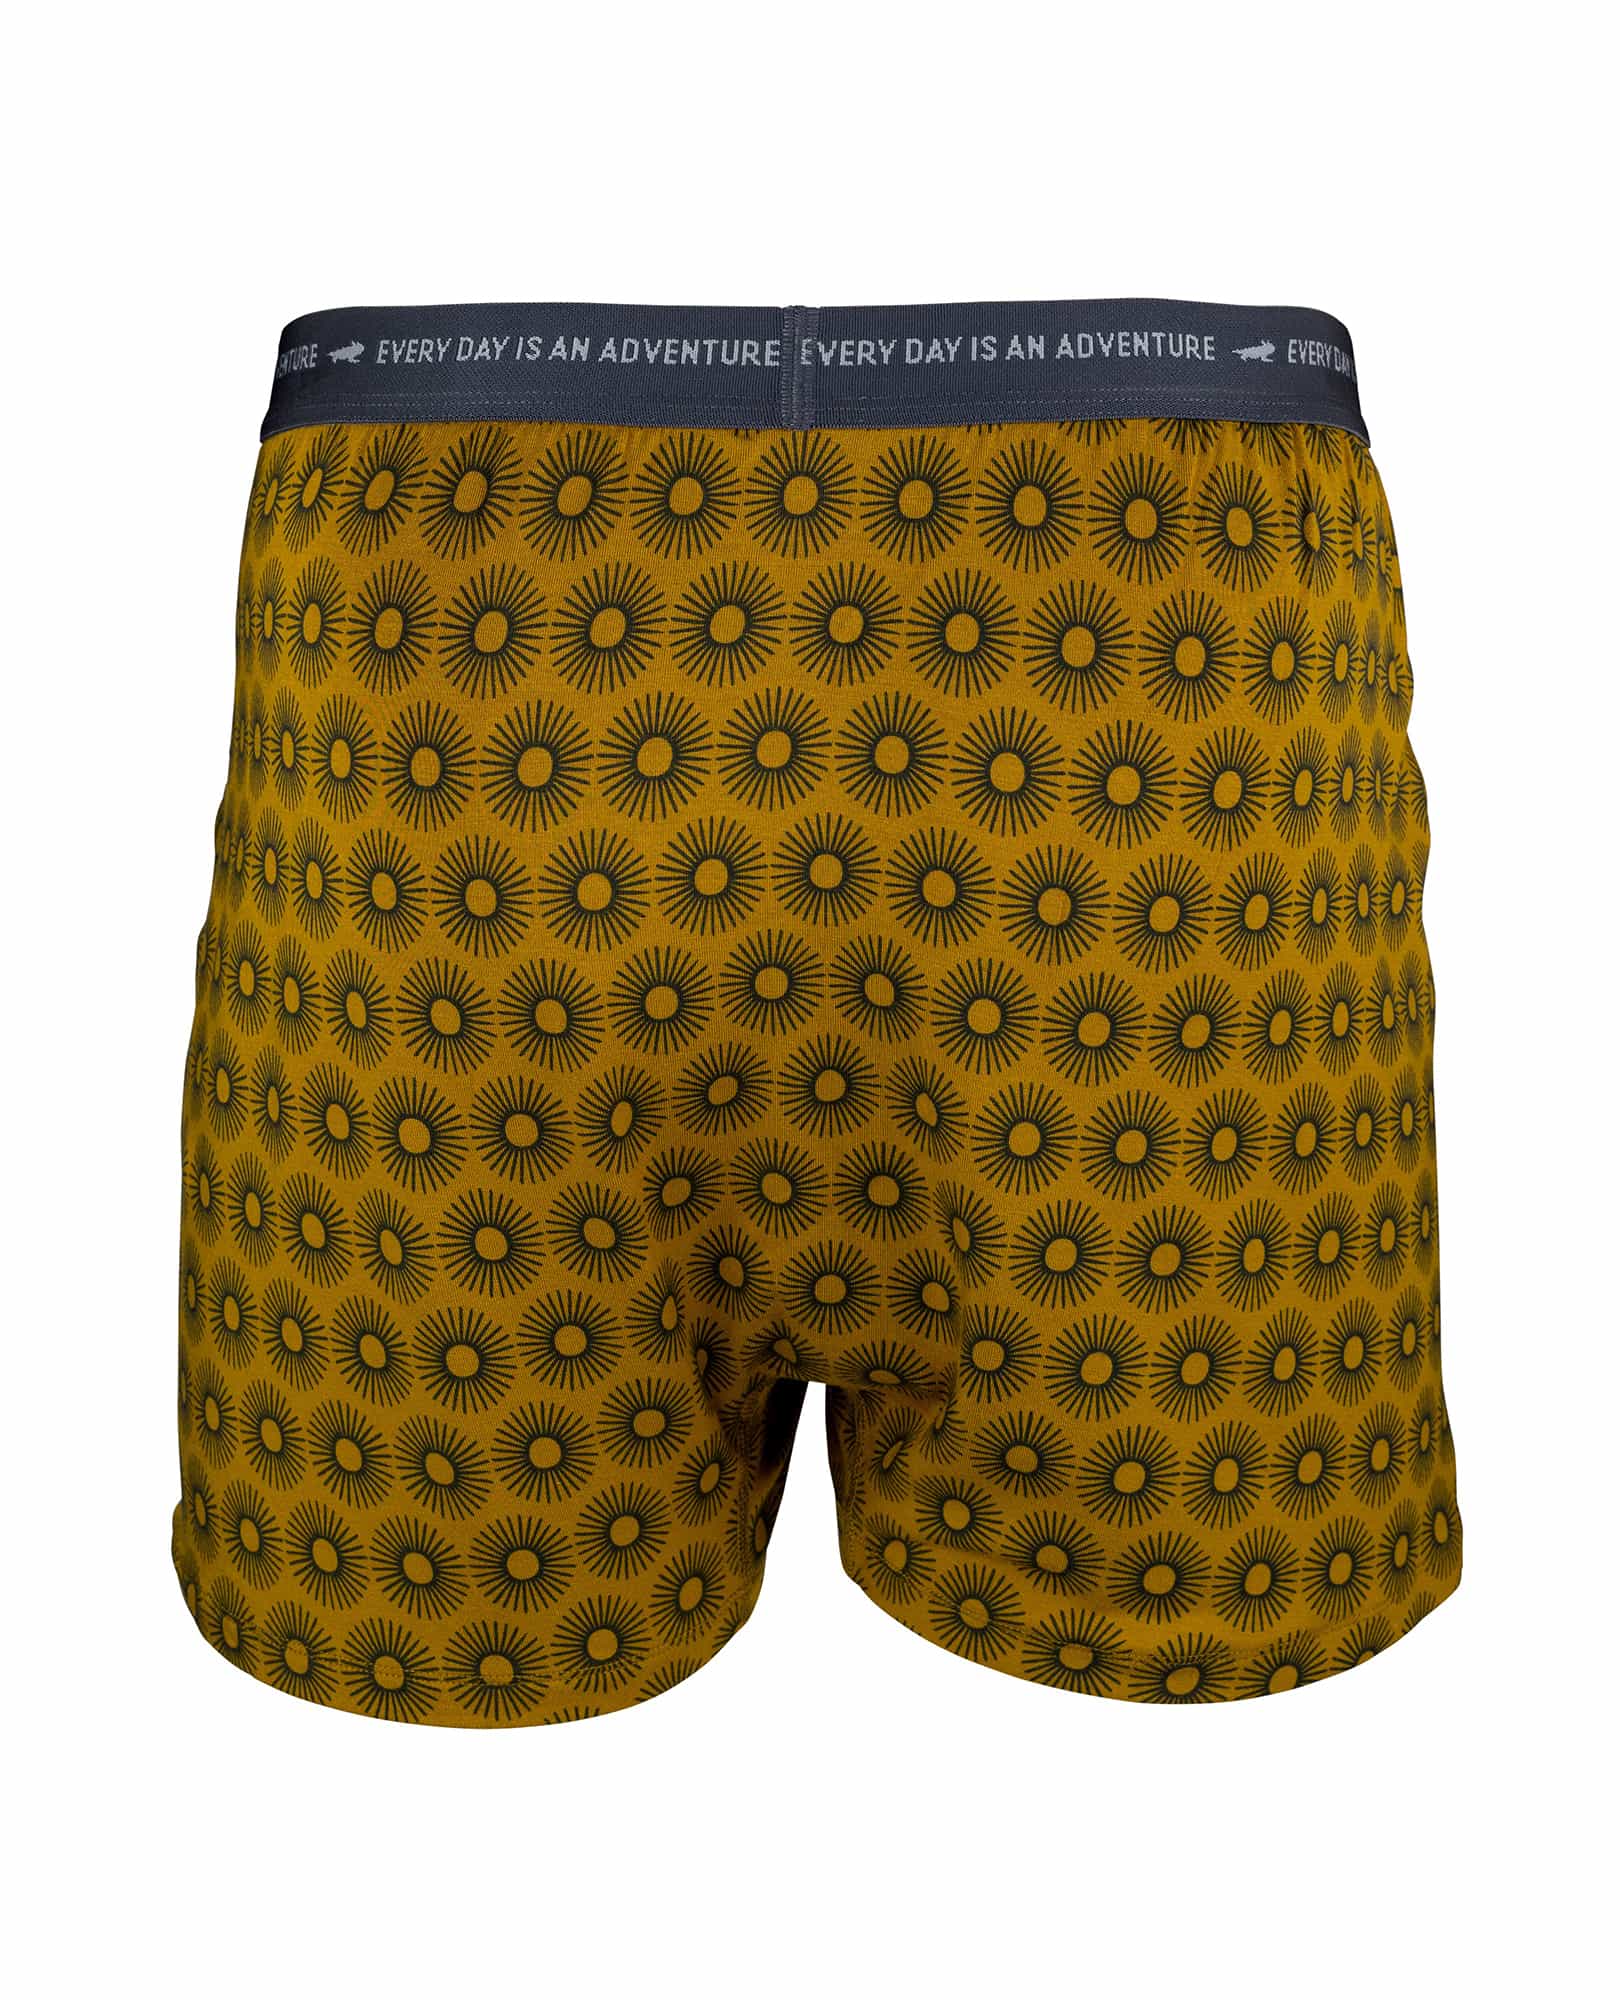 Men's Ethical Tencel Boxers | Toad&Co